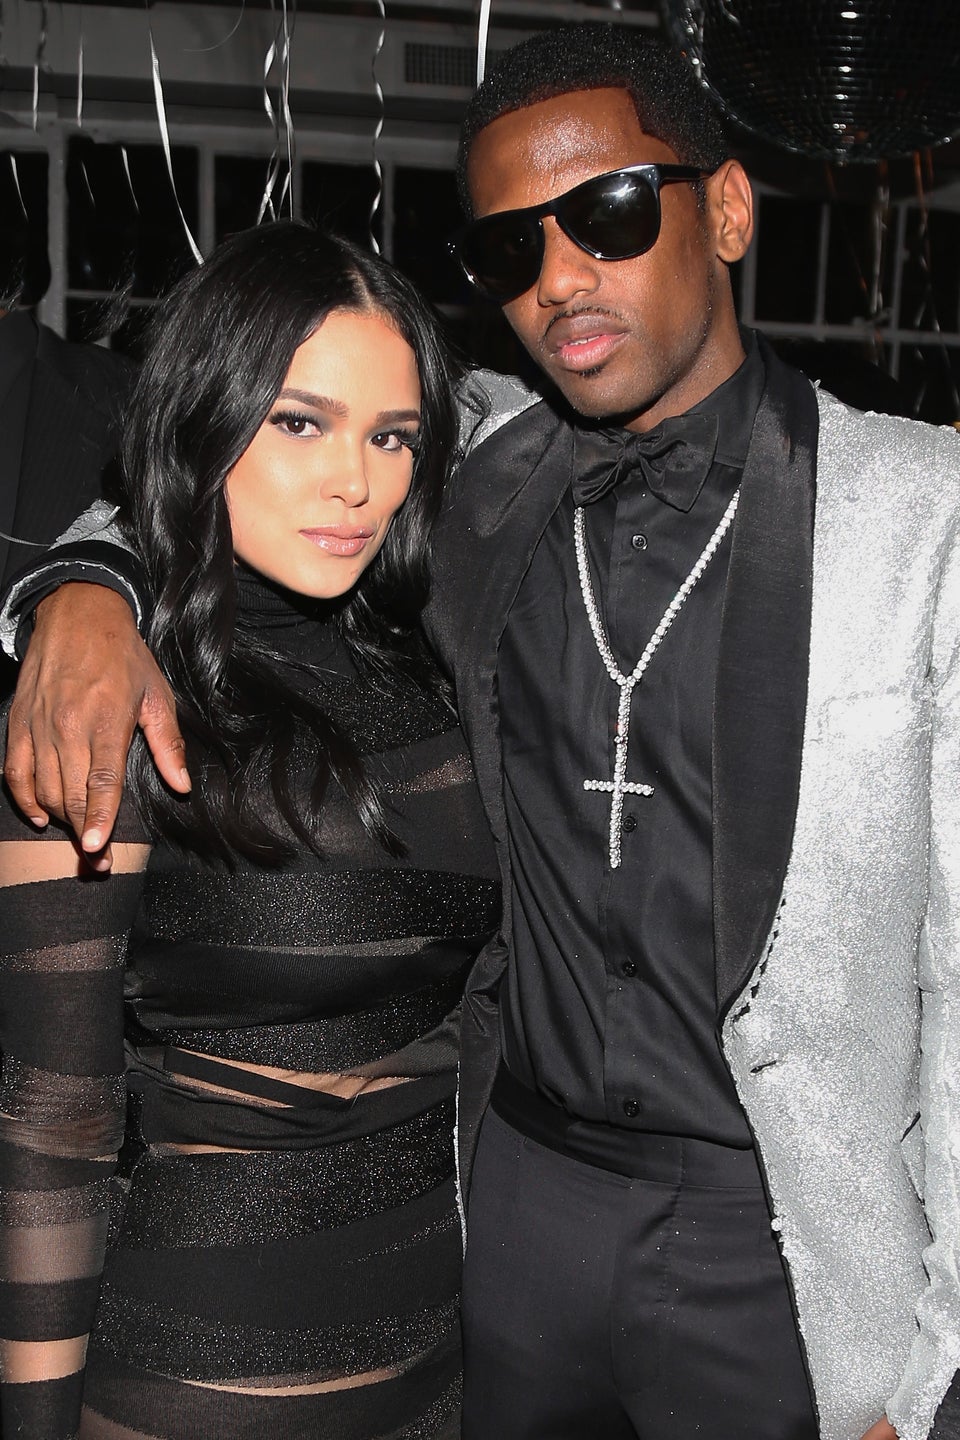 Fabolous Could Avoid Jail Time In Domestic Violence Incident